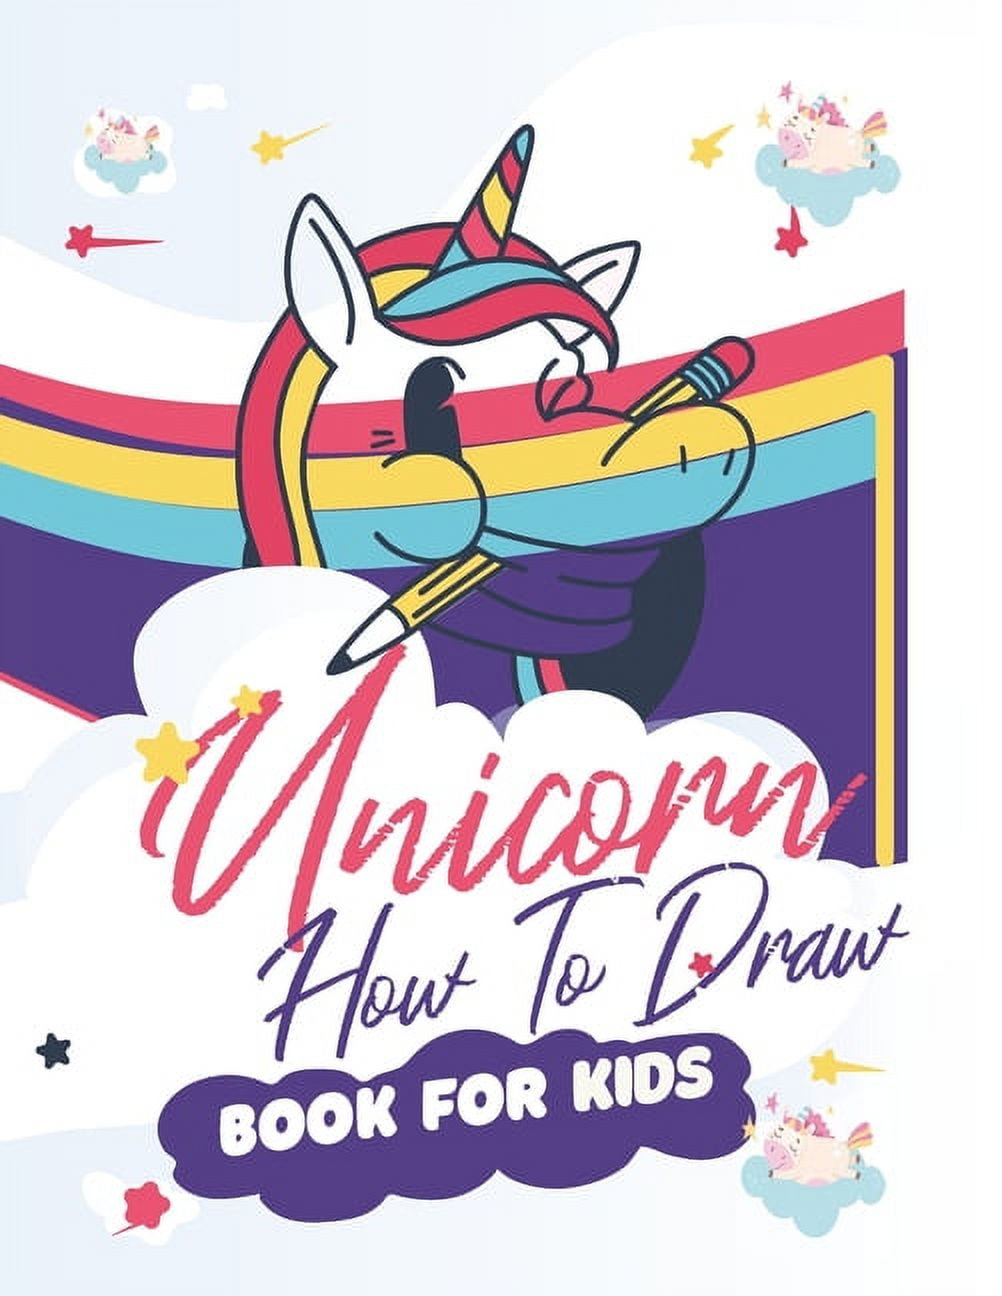 Drawing for kids 6 - 8 (Learn to draw - Cartoons): This book